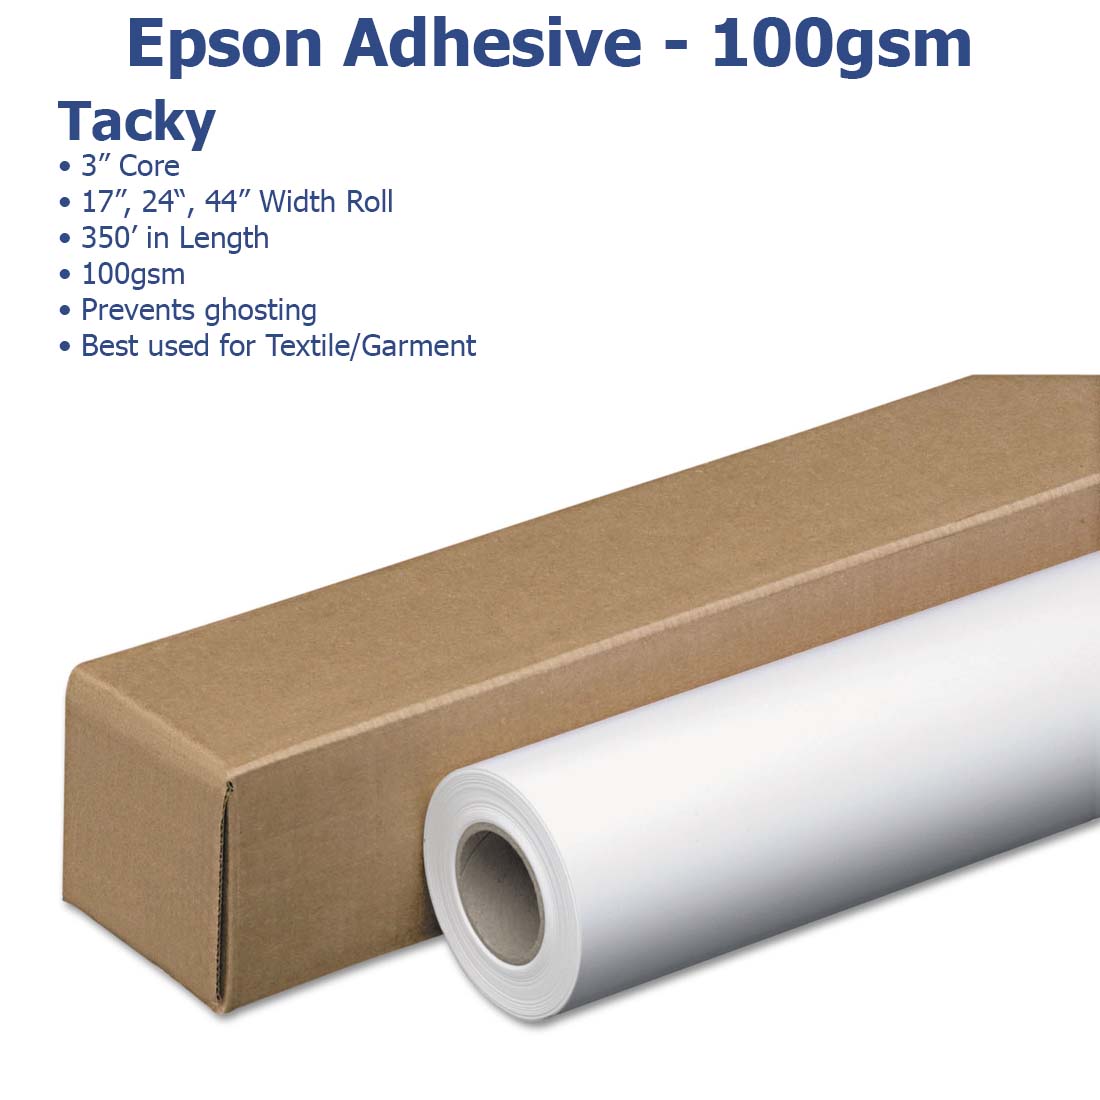 Epson® DS Adhesive Textile Transfer Roll - Joto Imaging Supplies Canada